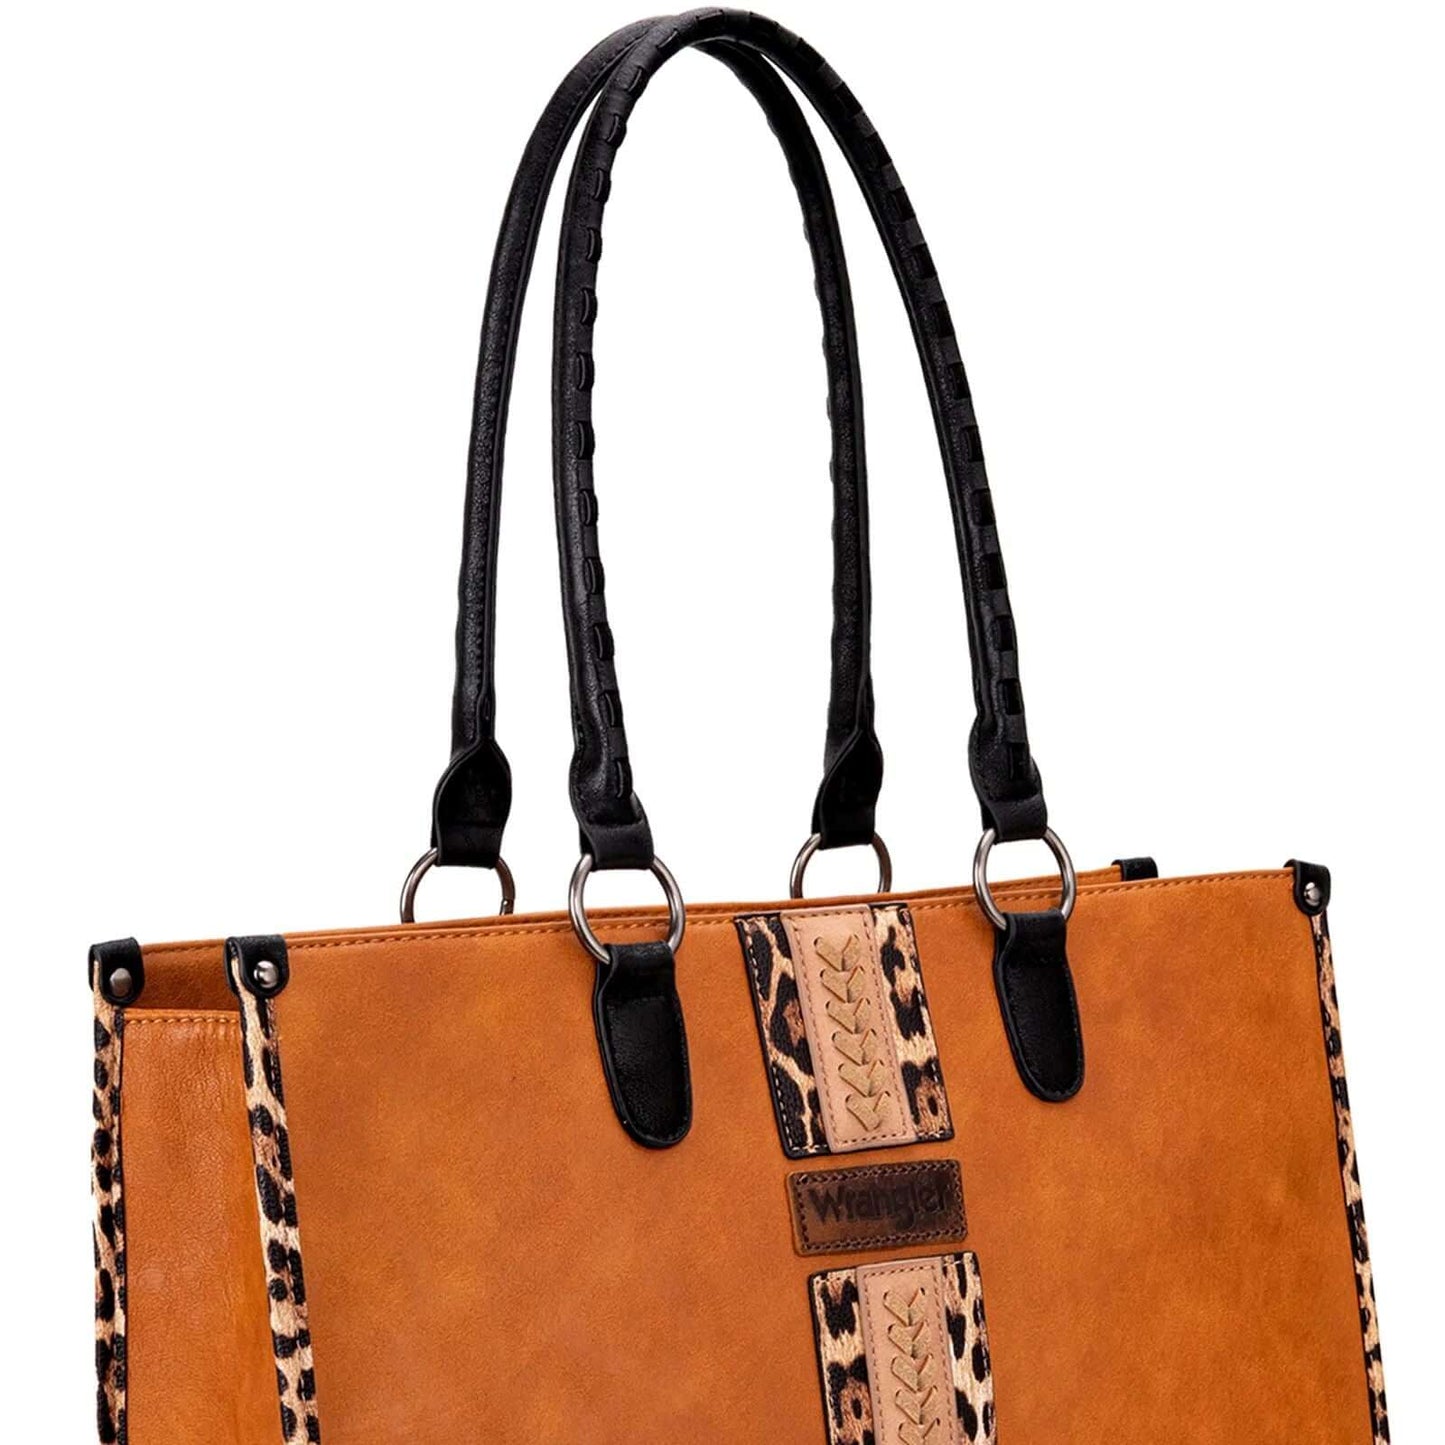 Wrangler-Leopard-Print-Concealed-Carry-Purse-Western-Tote-Brown-WG83G-8317-BR-5